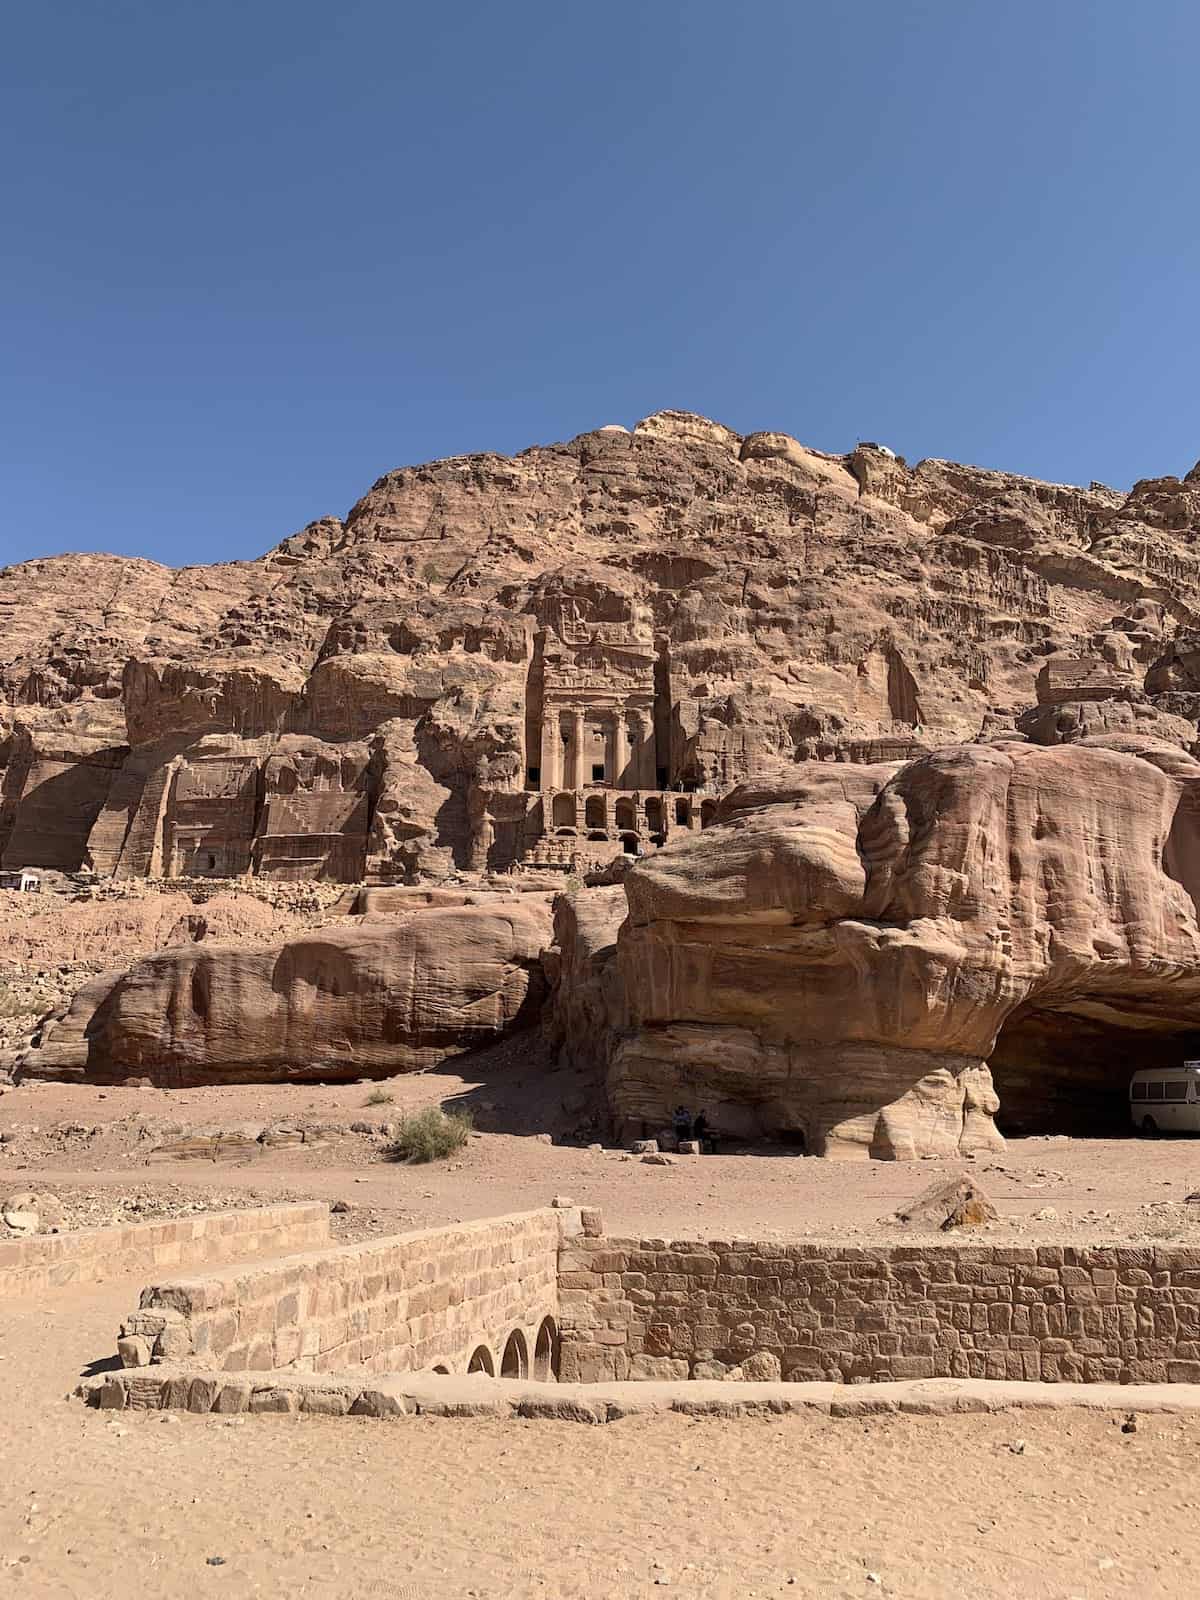 Sandstone structure of the Royal Tombs in Petra Jordan.